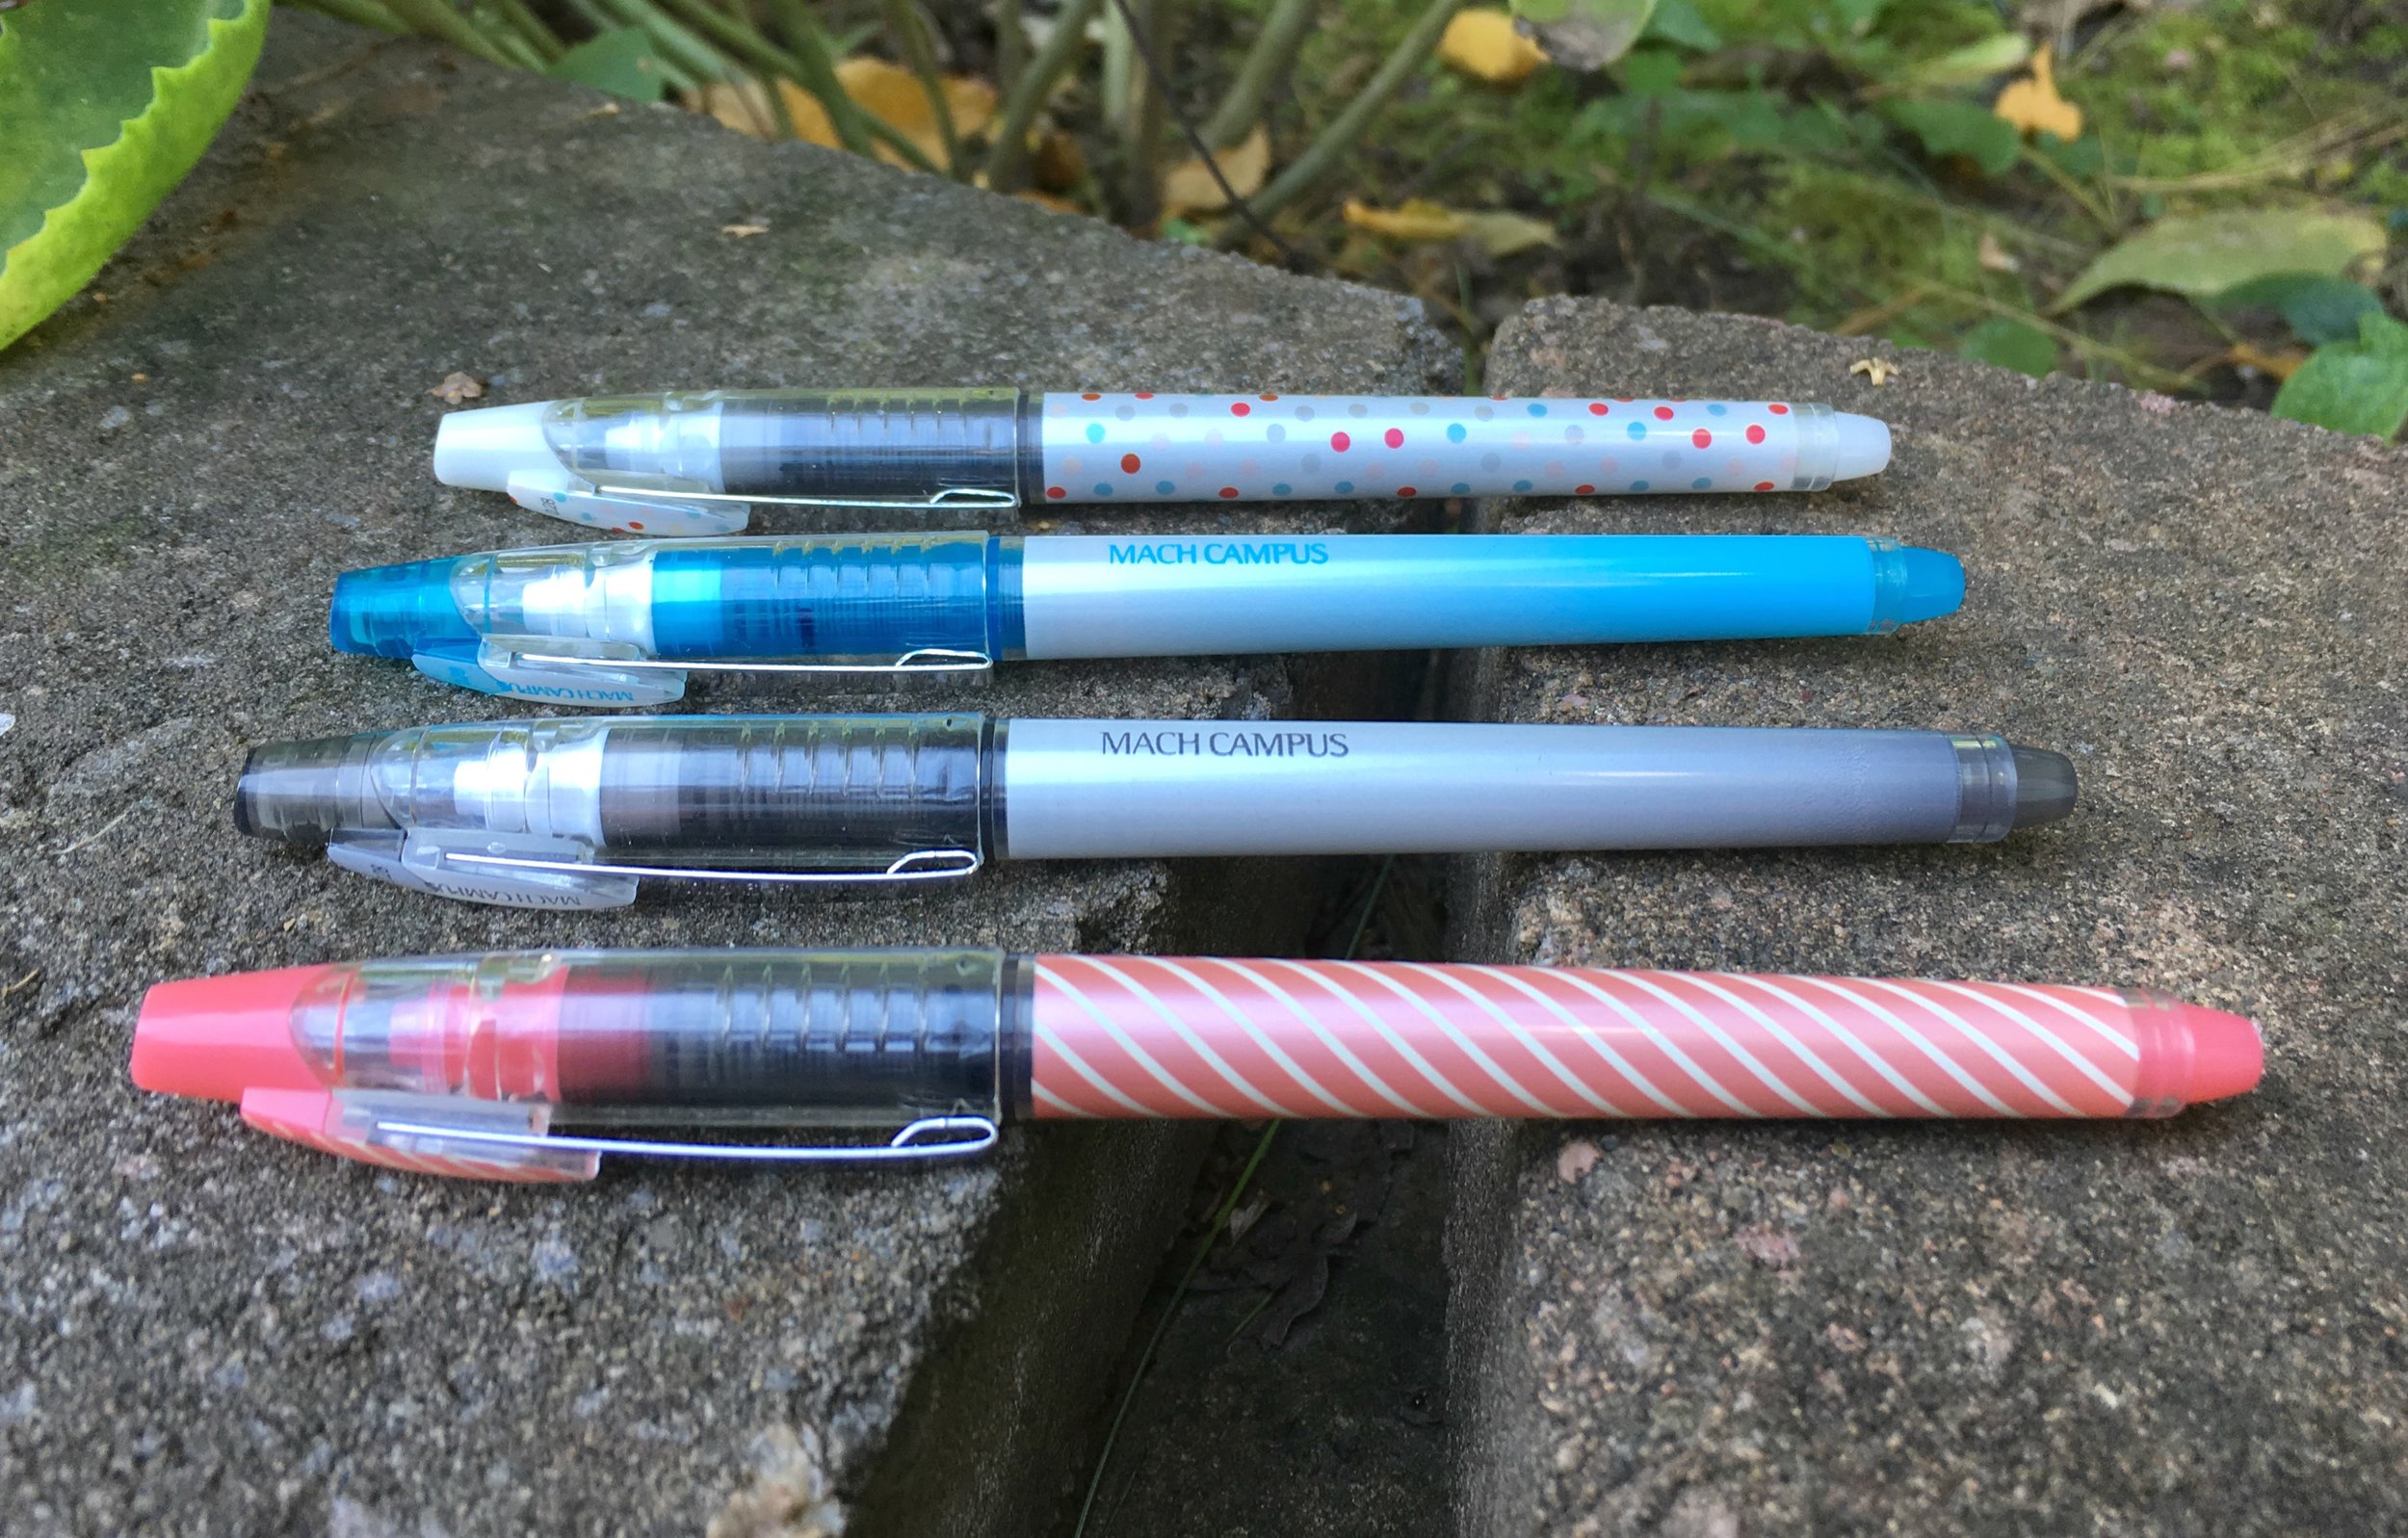 Review: Pilot Frixion Color-Pencil-Like Pen Set - The Well-Appointed Desk